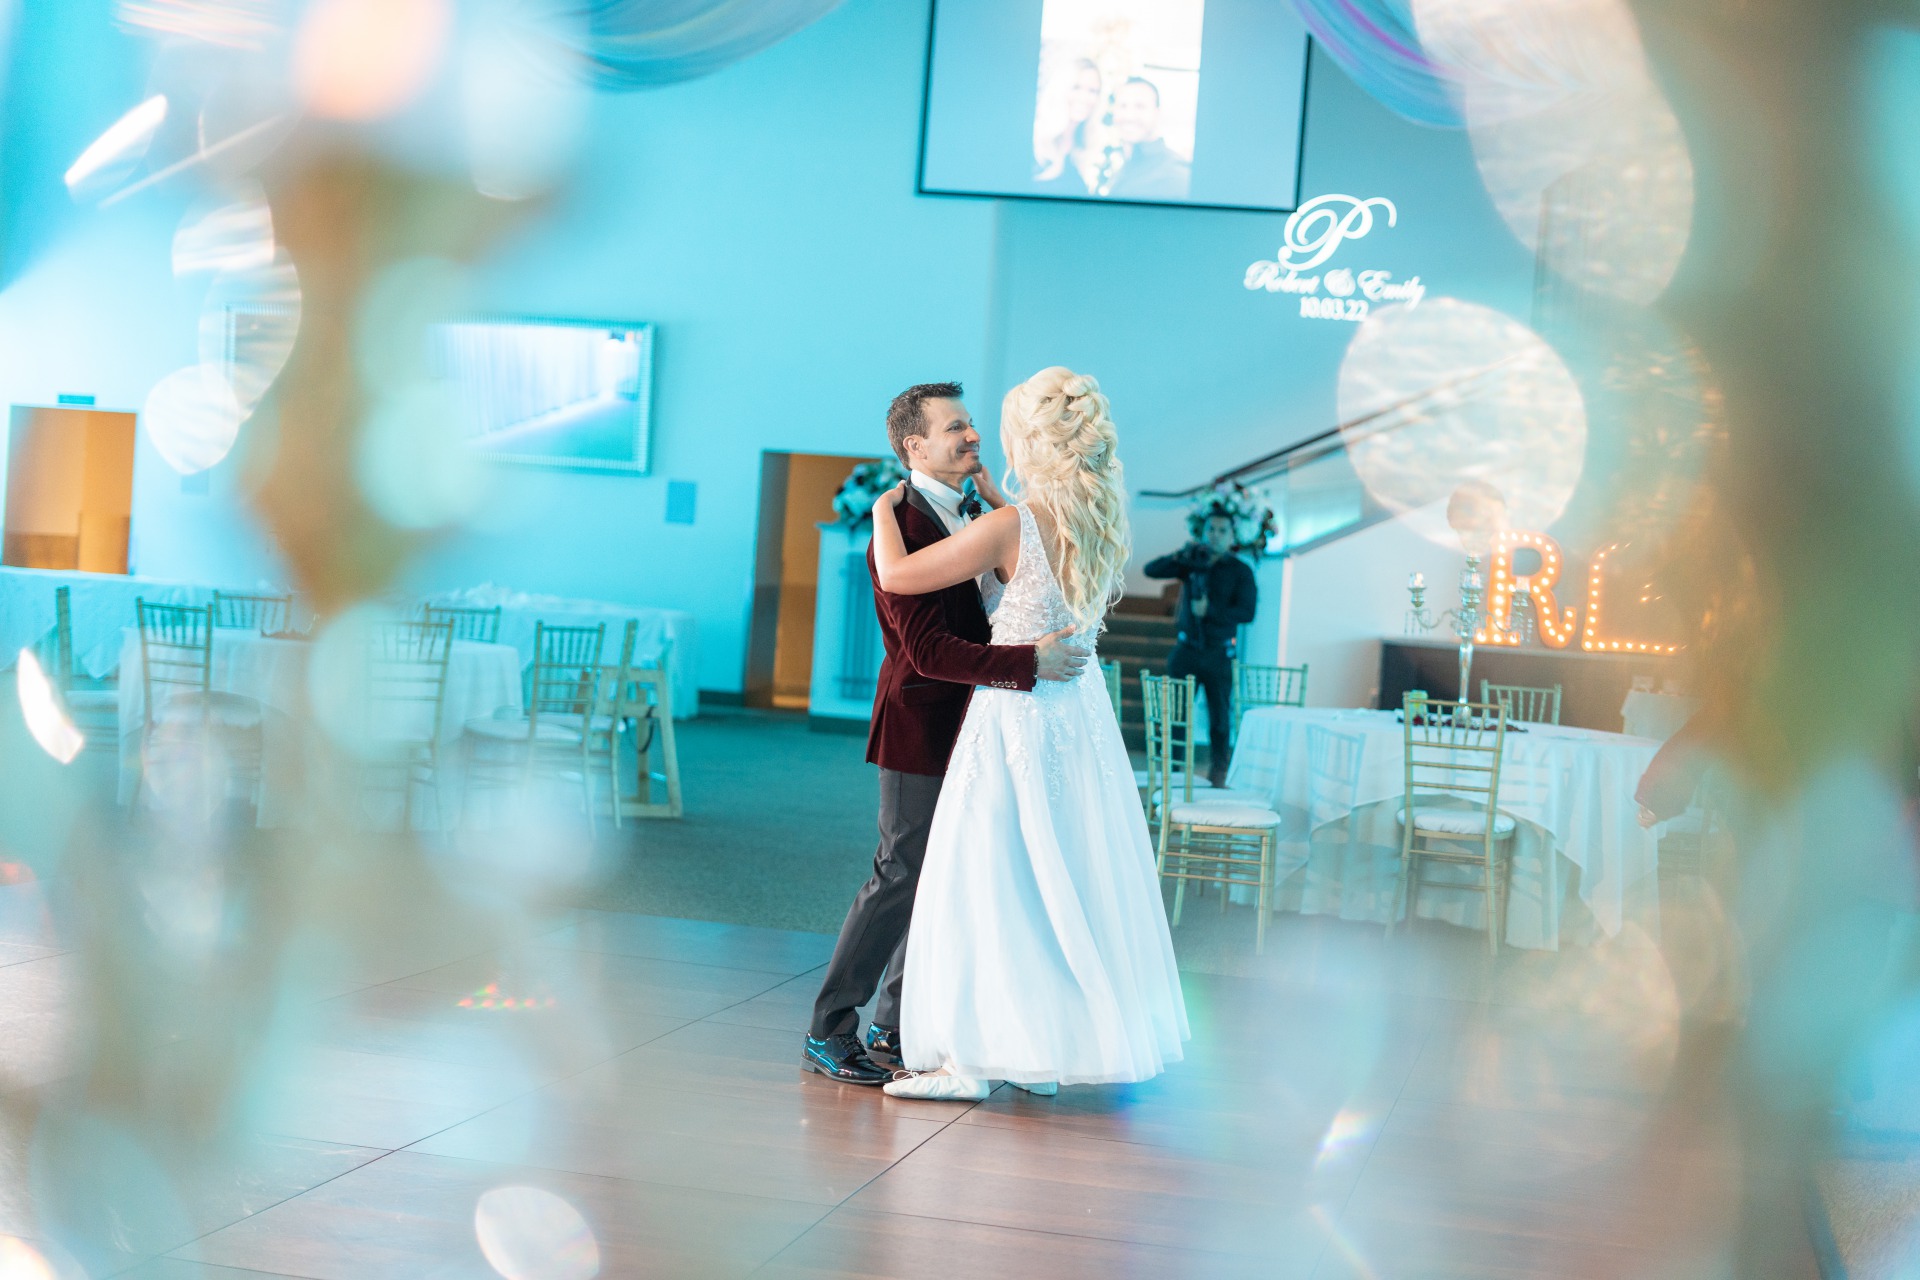 The happy couple have their first dance at their Las Vegas wedding.